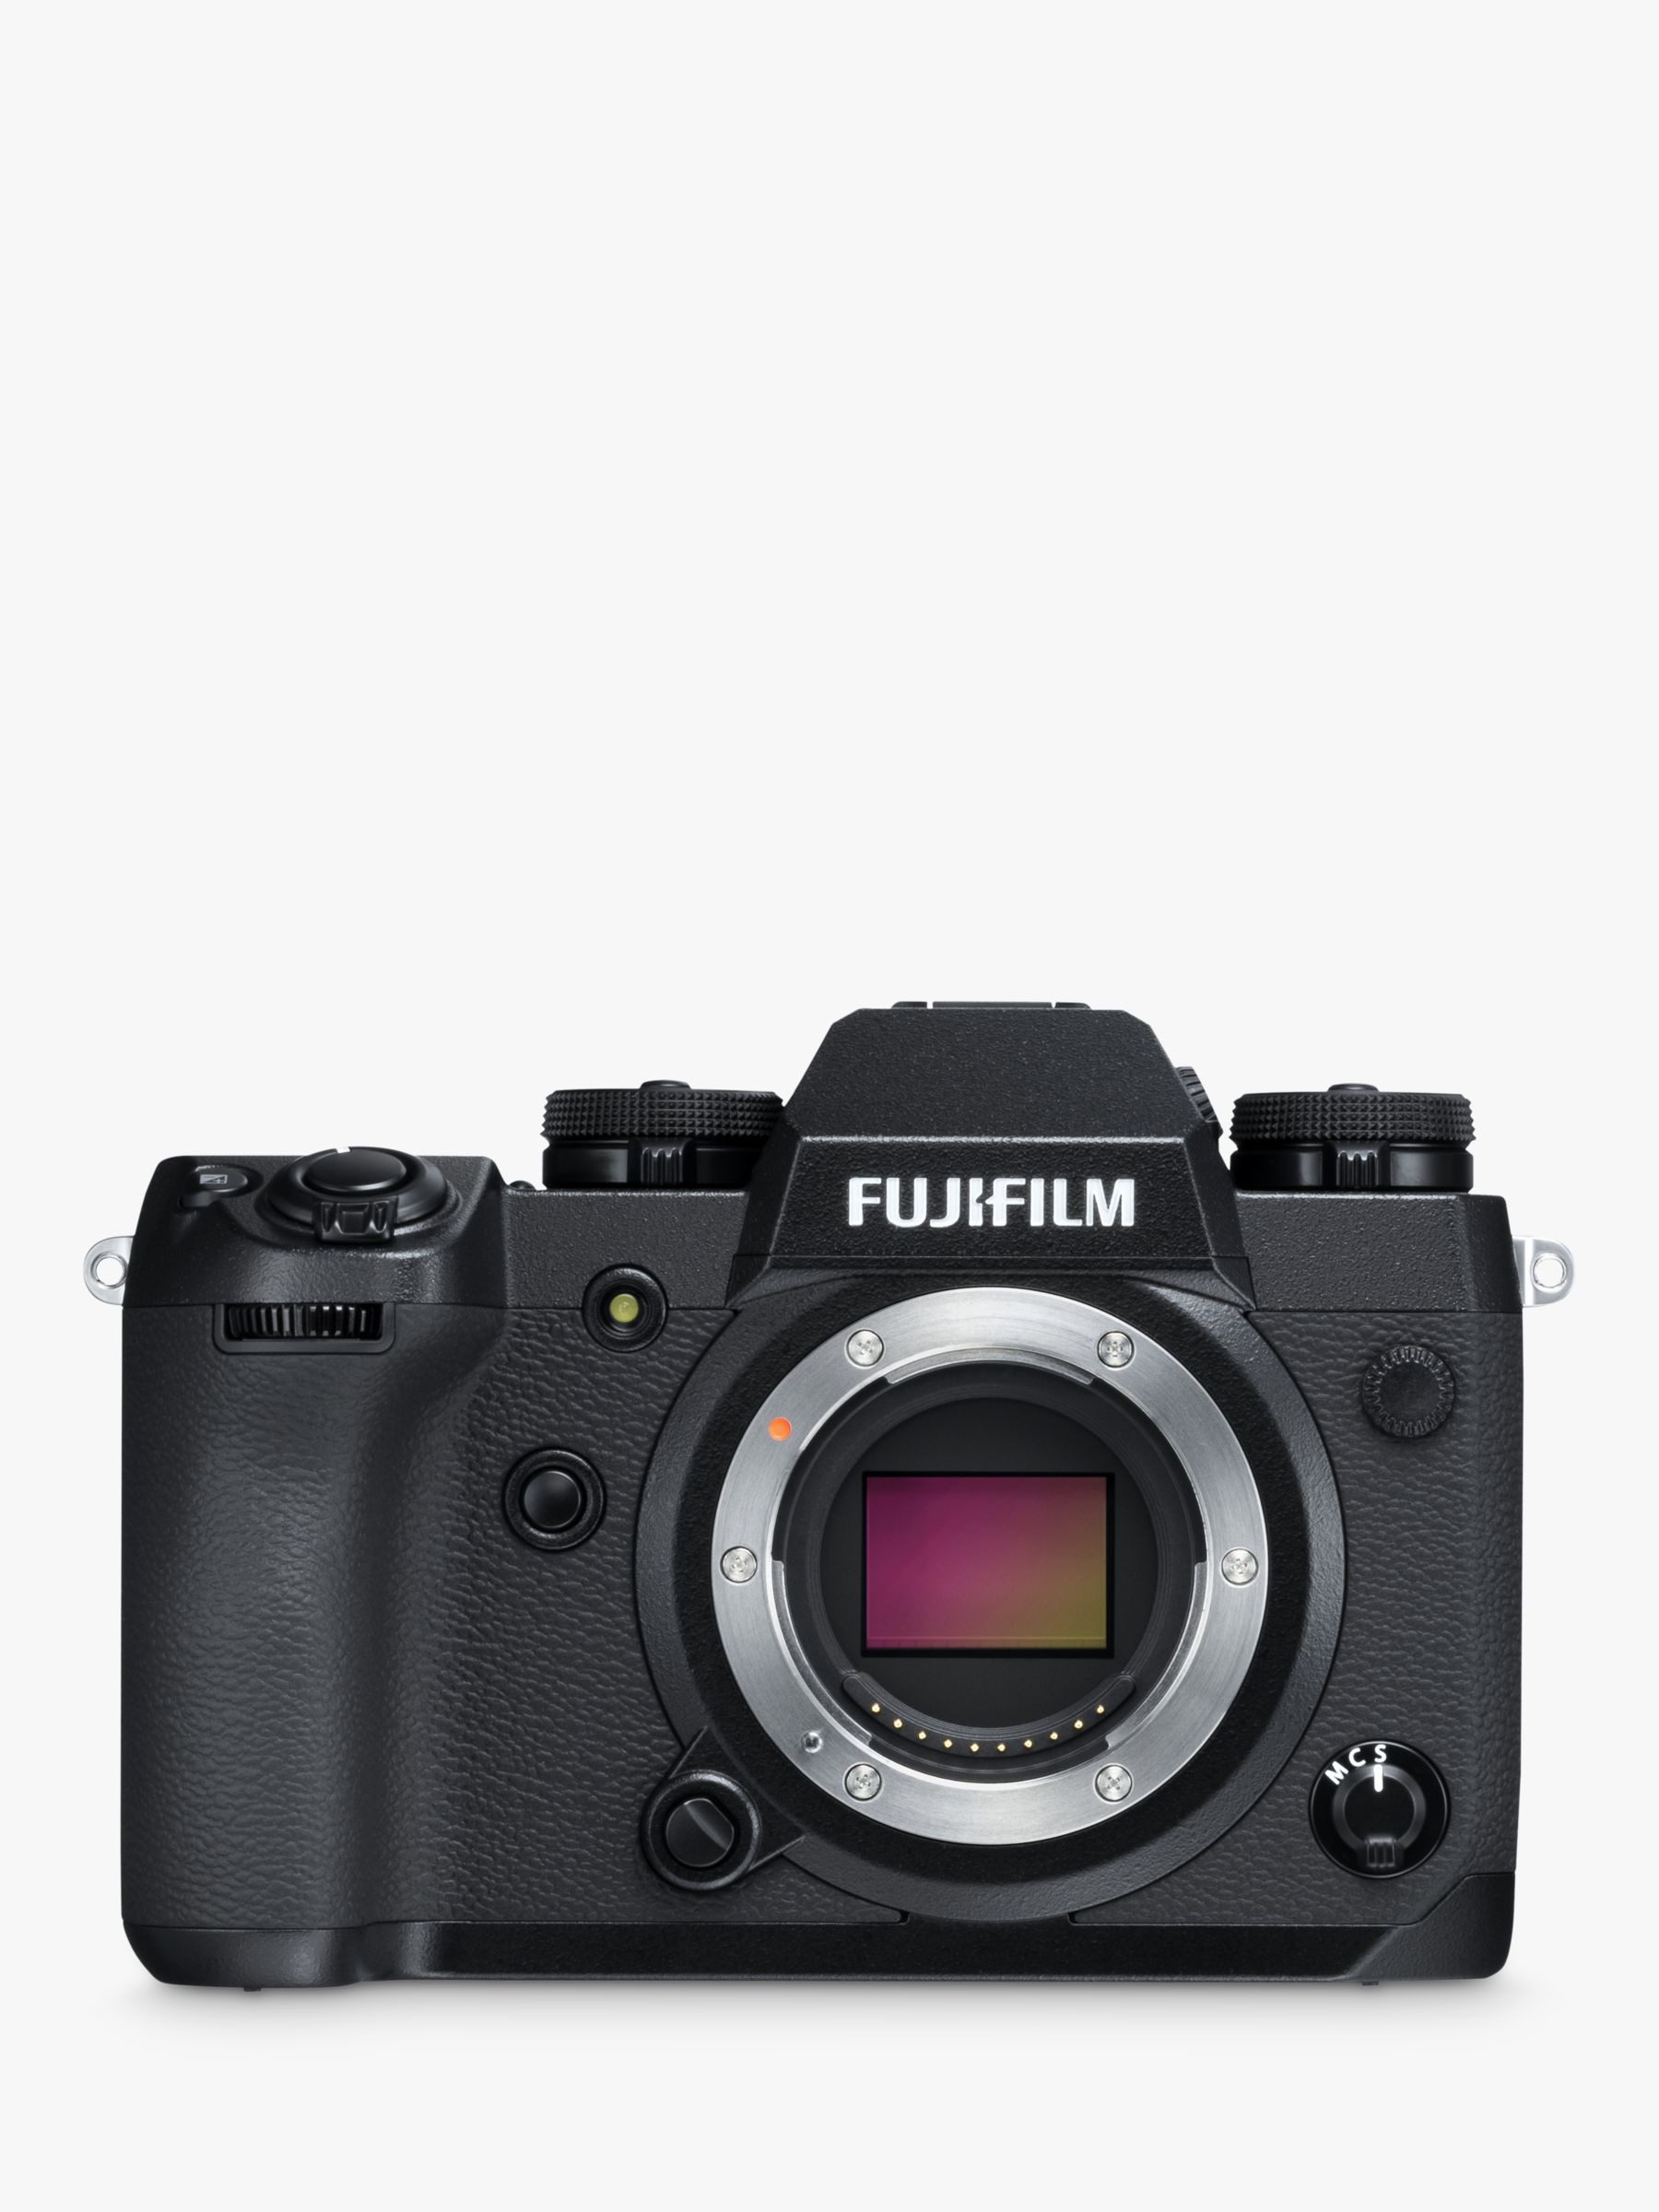 Fujifilm X-H1 Compact System Camera, 4K Ultra HD, 24.3MP, Wi-Fi, Bluetooth, OLED EVF, In-Body Image Stabilisation & 3 Tiltable LCD Touch Screen, Body Only, Black